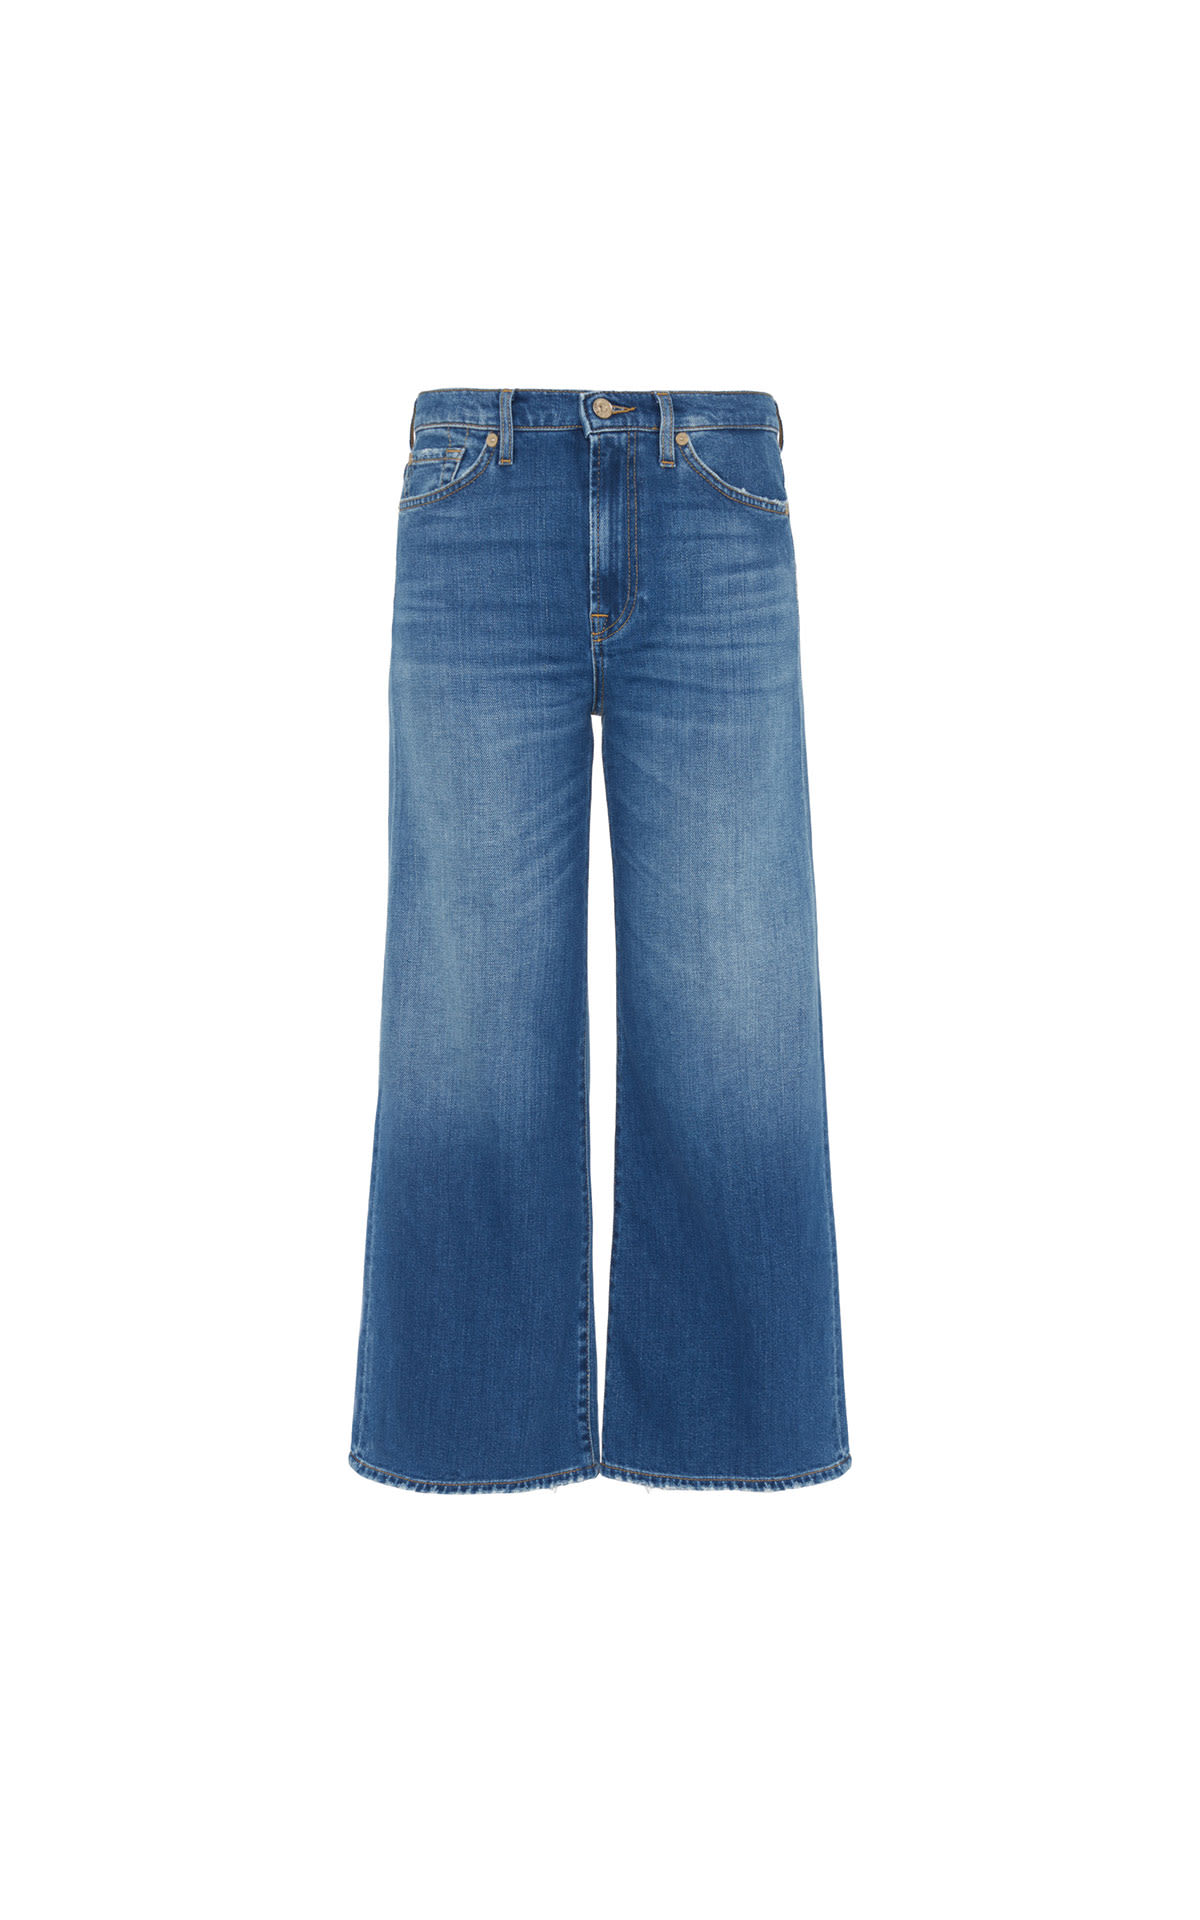 7 For all Mankind The cropped Jo raindrop from Bicester Village